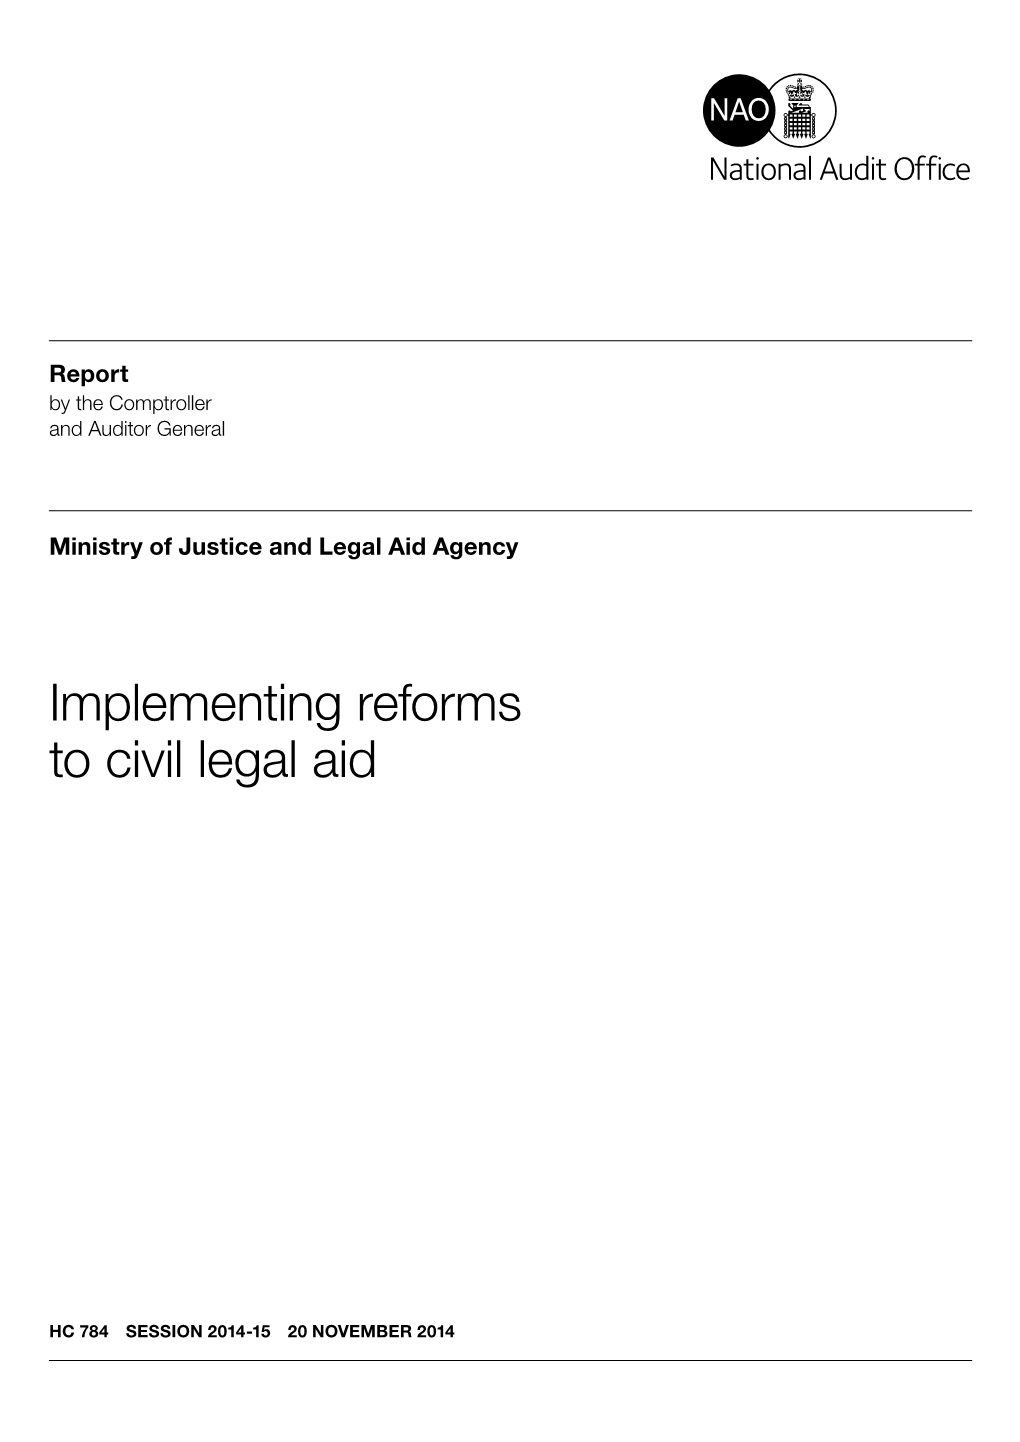 Implementing Reforms to Civil Legal Aid